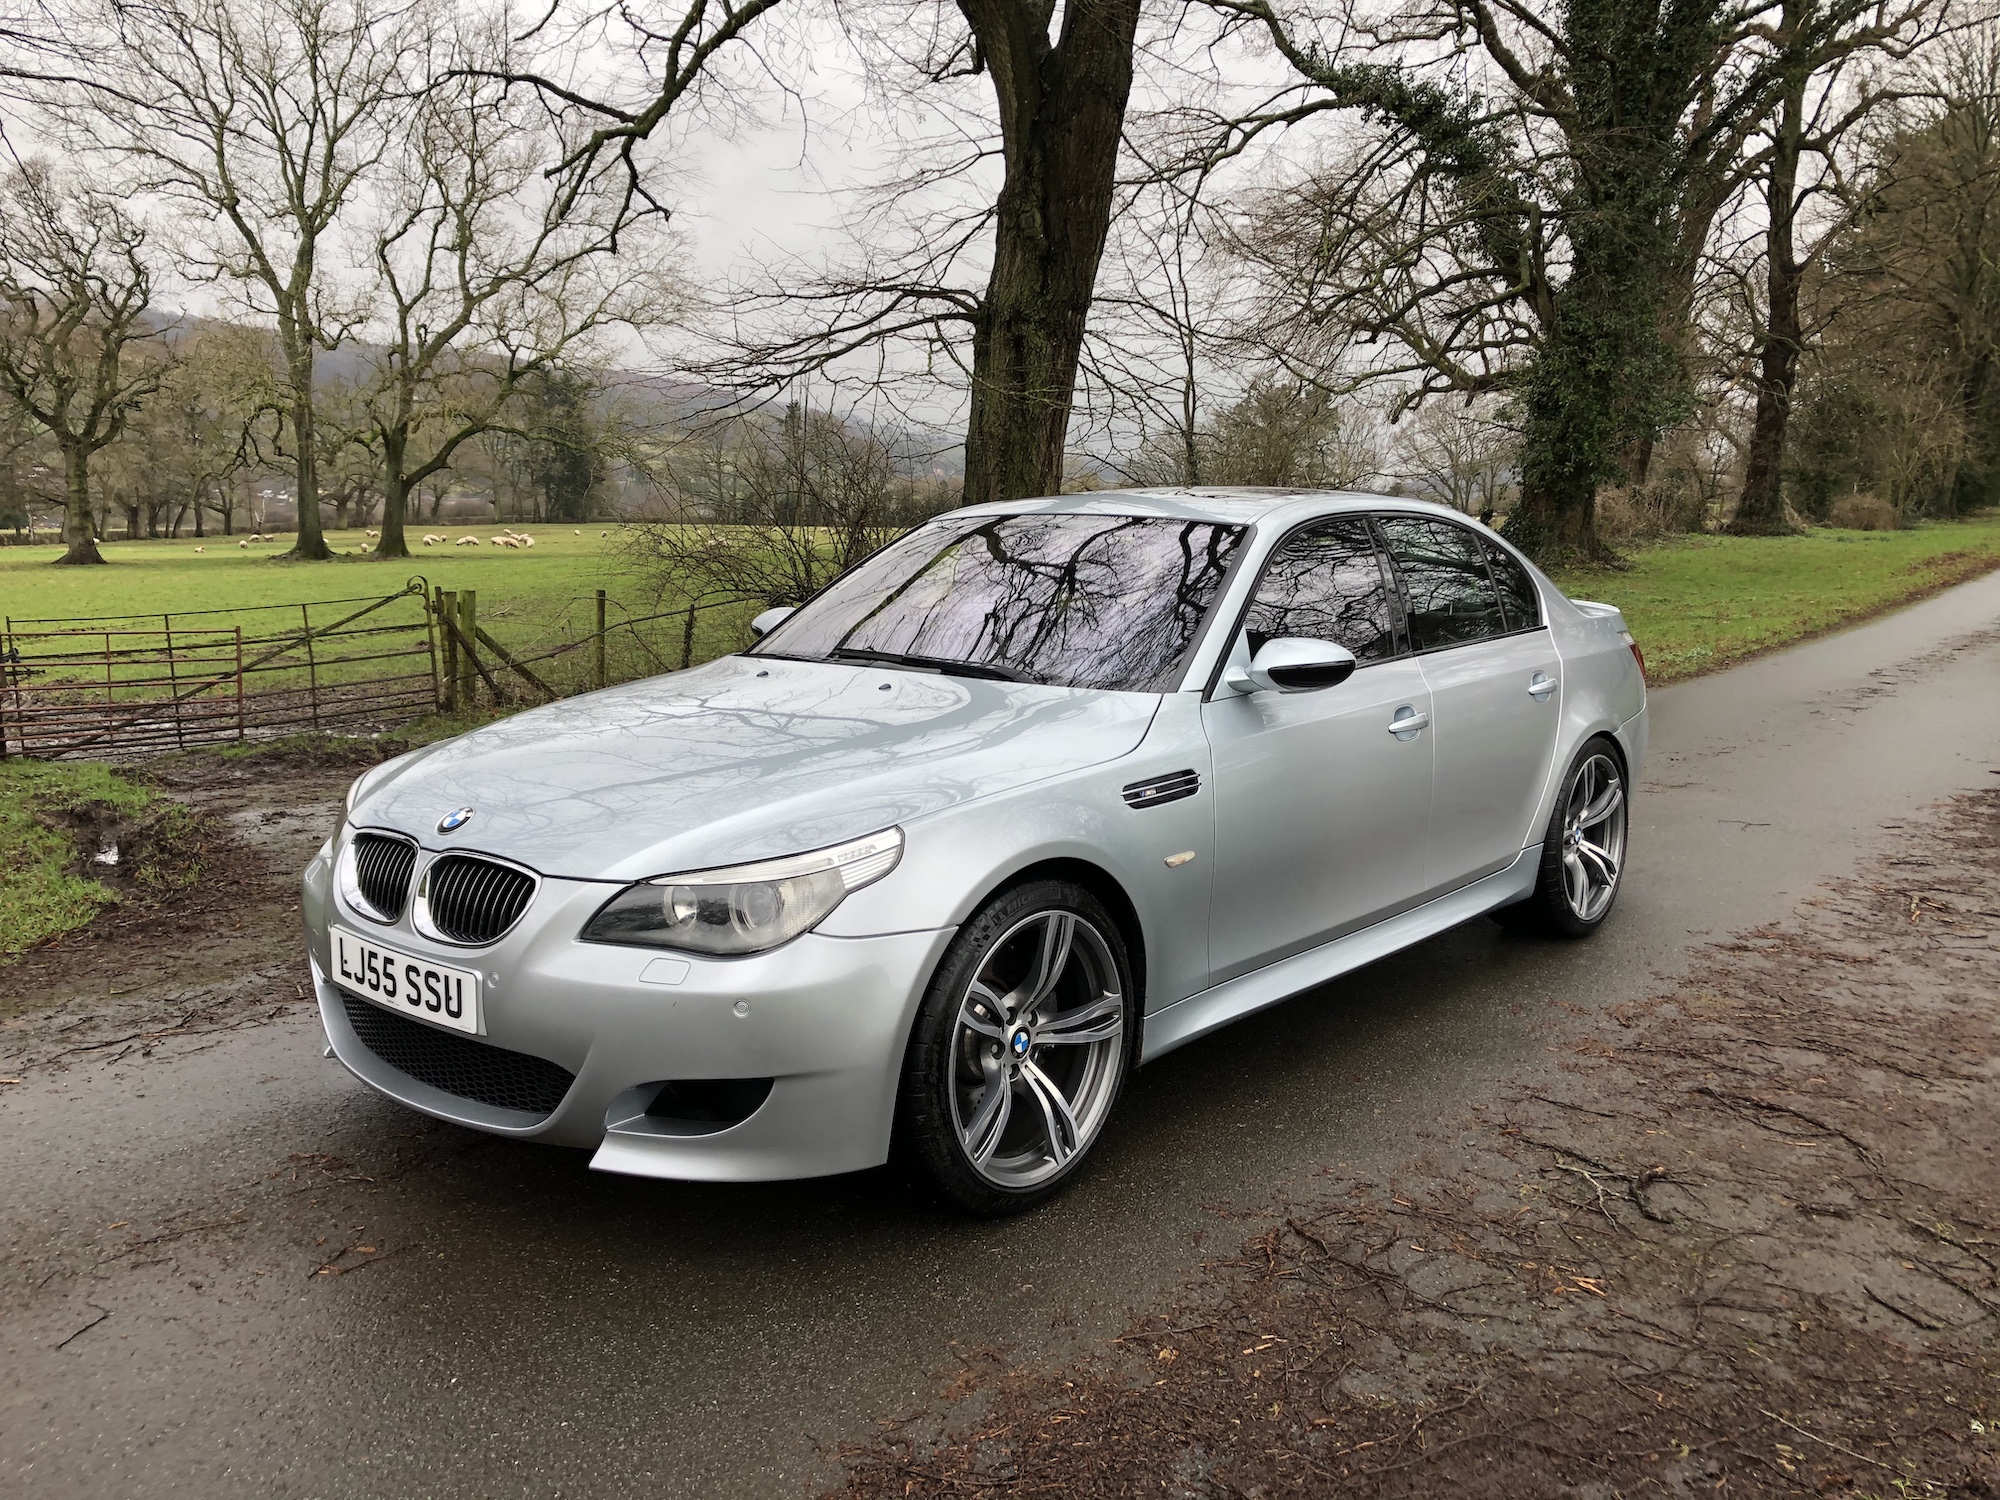 2005 BMW (E60) M5 - Collecting Cars